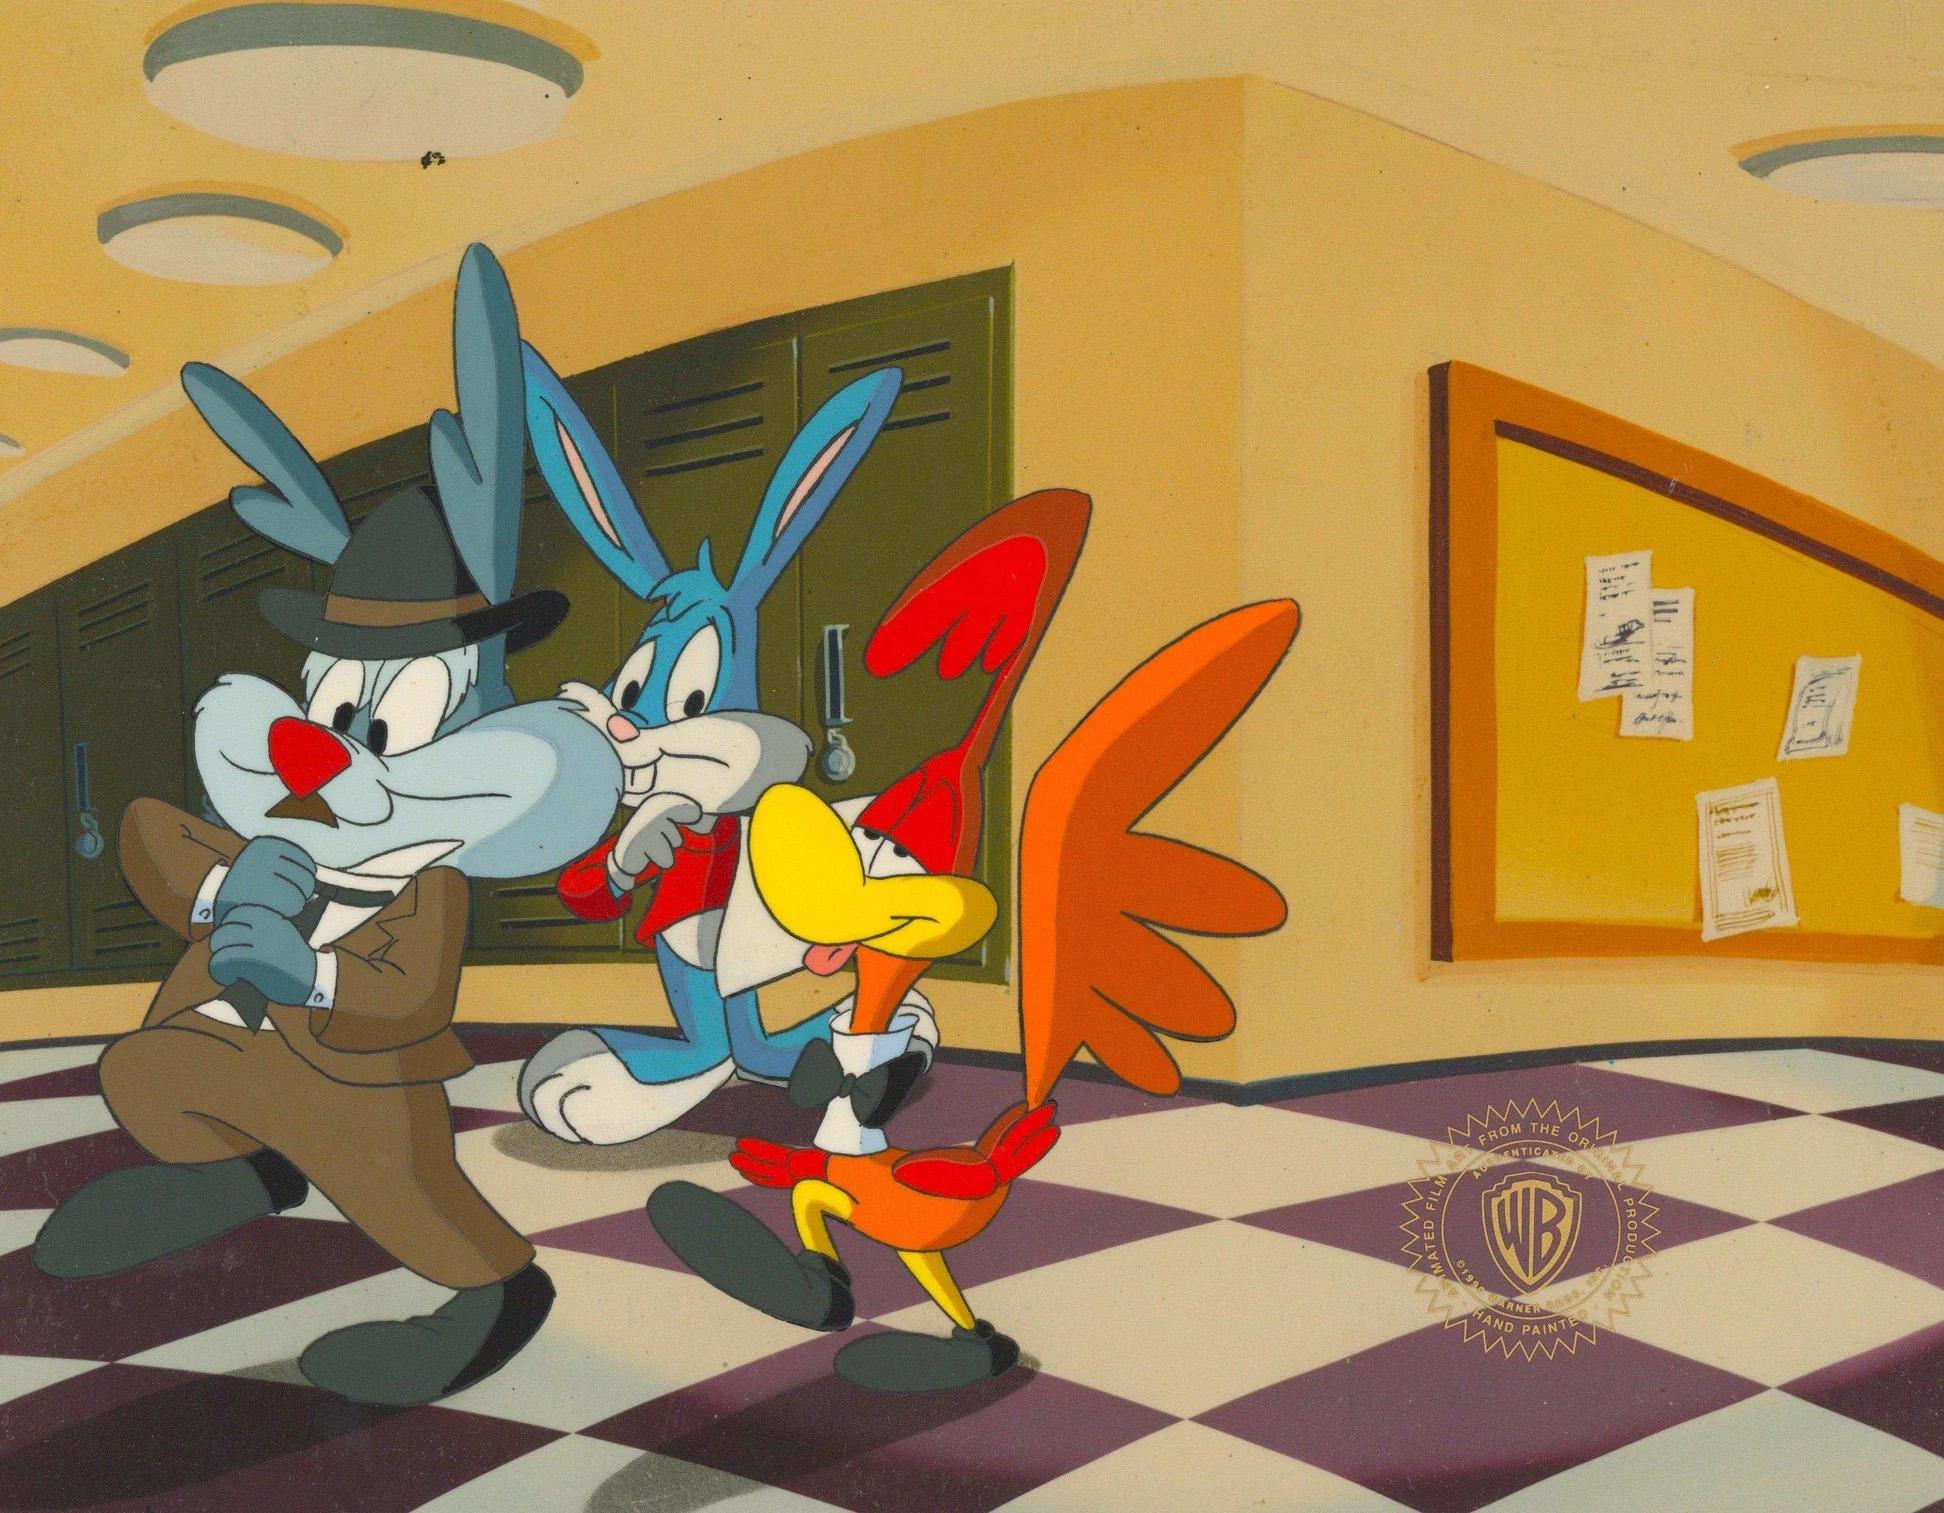 Tiny Toons Original Production Cel: Calamity, Buster Bunny, and Little Beeper - Art by Warner Bros. Studio Artists